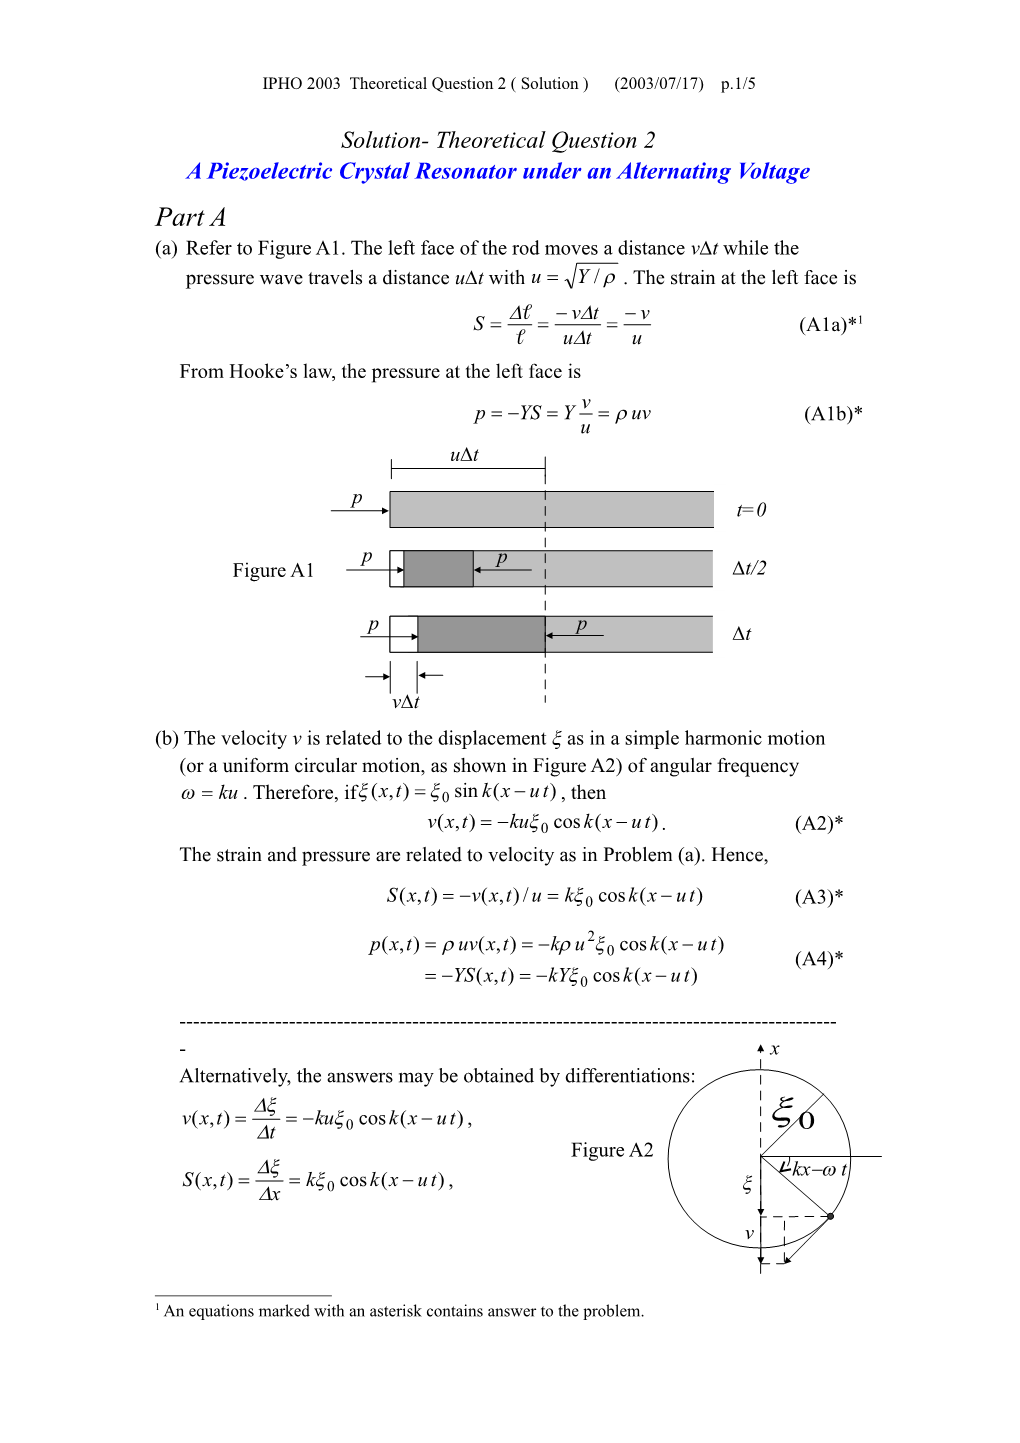 Solution- Theoretical Question 2